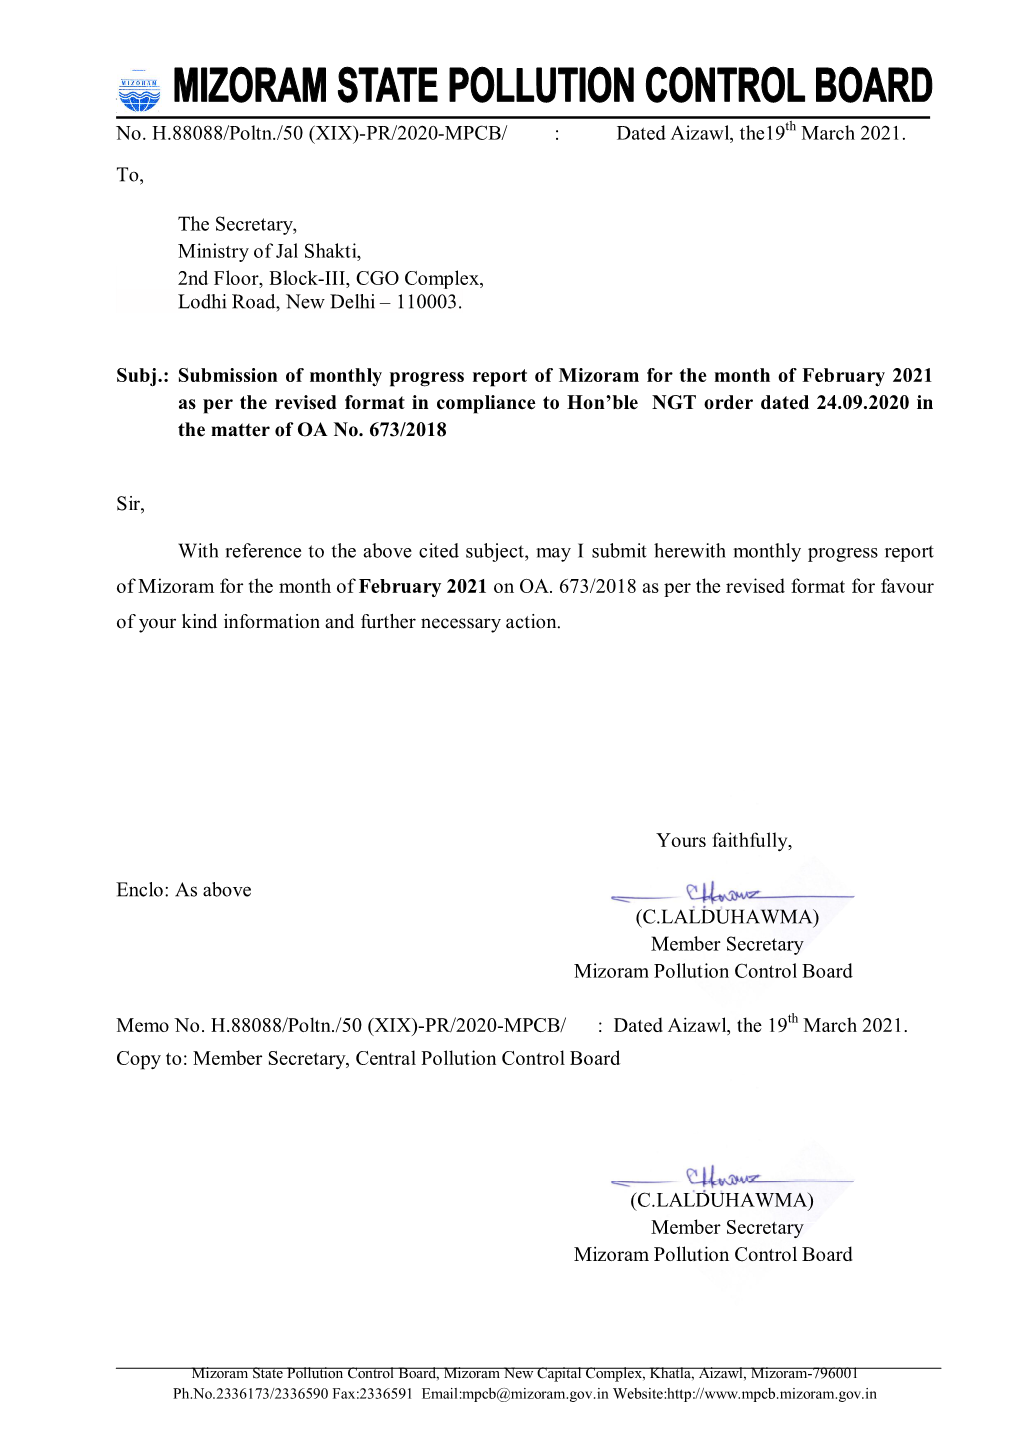 February 2021 As Per the Revised Format in Compliance to Hon’Ble NGT Order Dated 24.09.2020 in the Matter of OA No